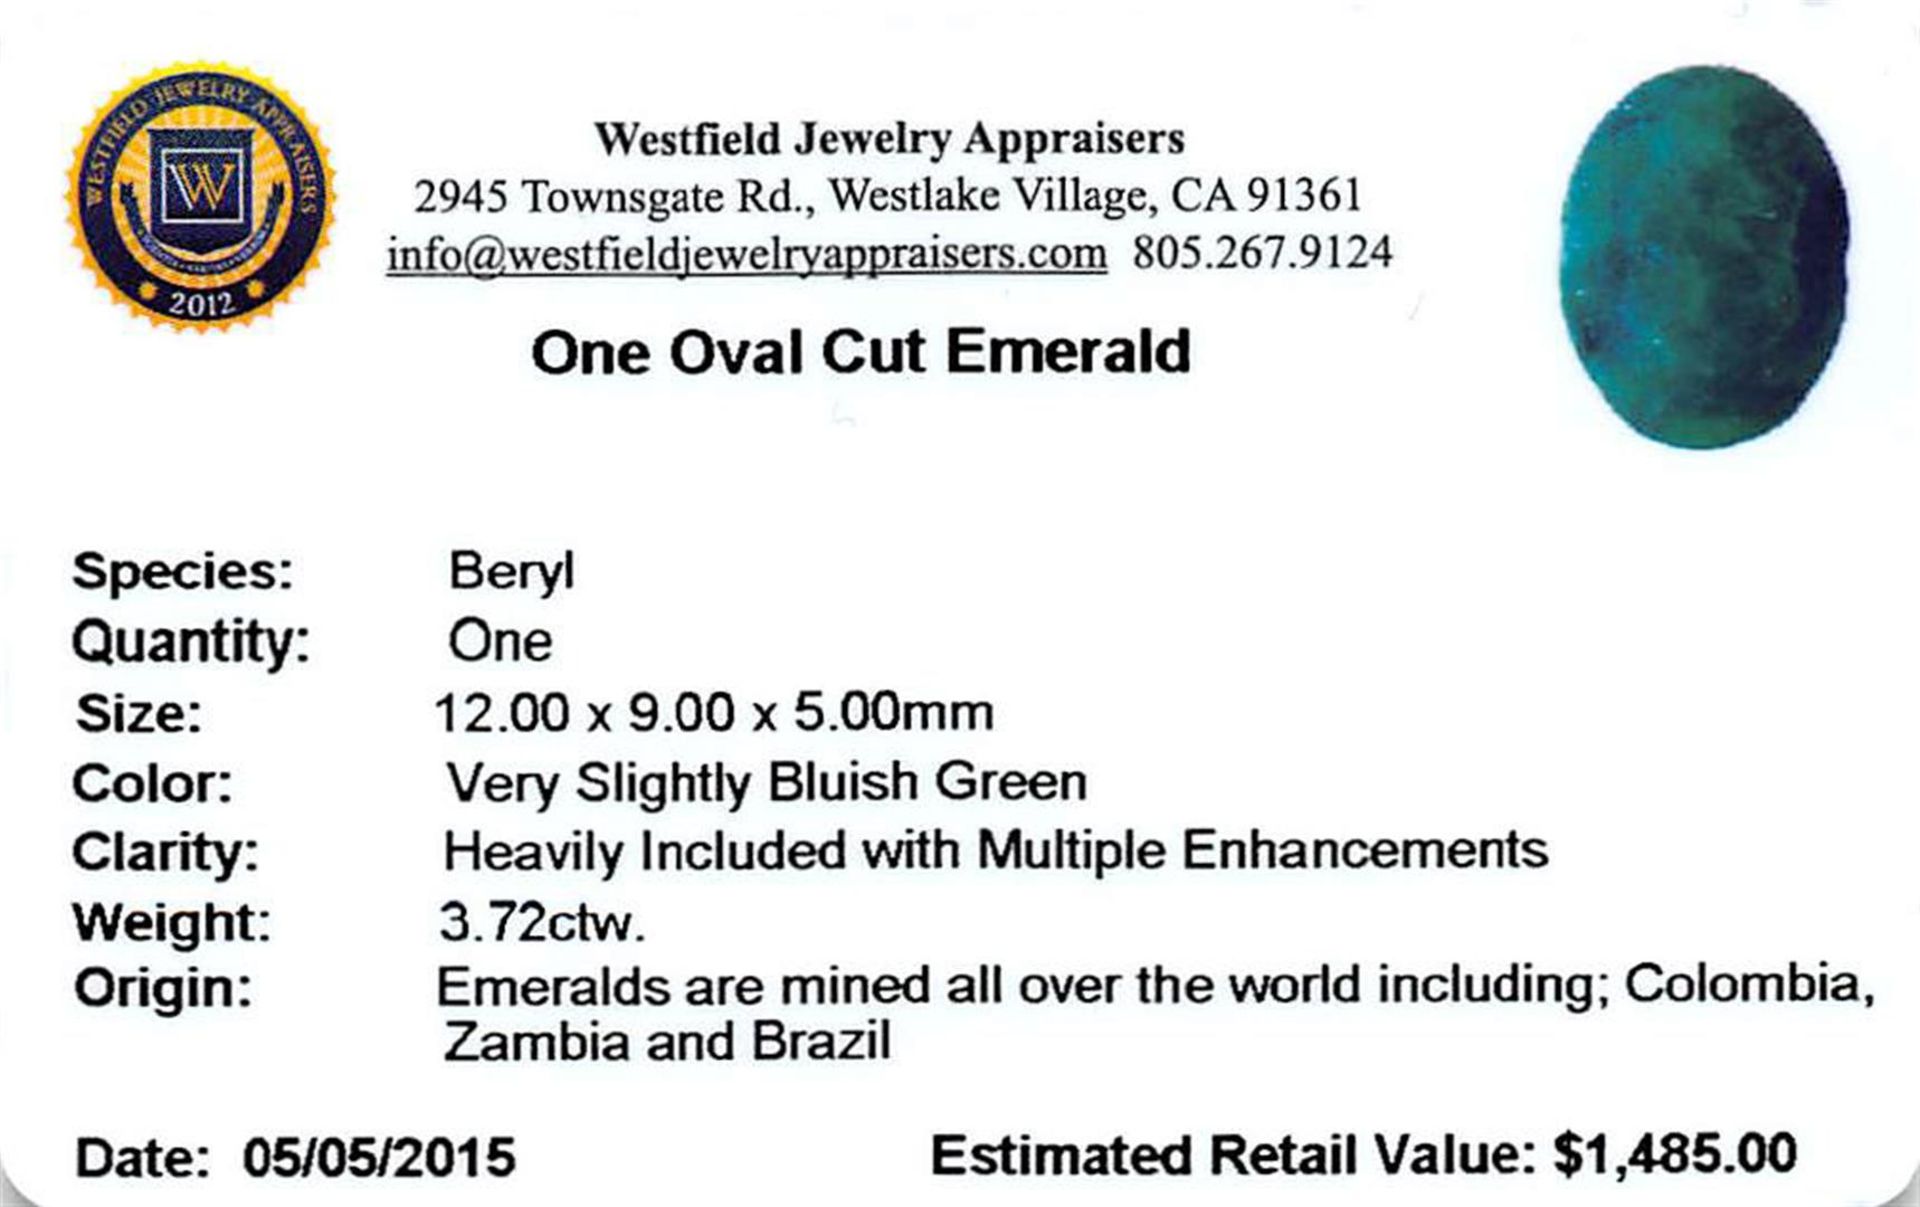 3.72 ctw Oval Emerald Parcel - Image 2 of 2